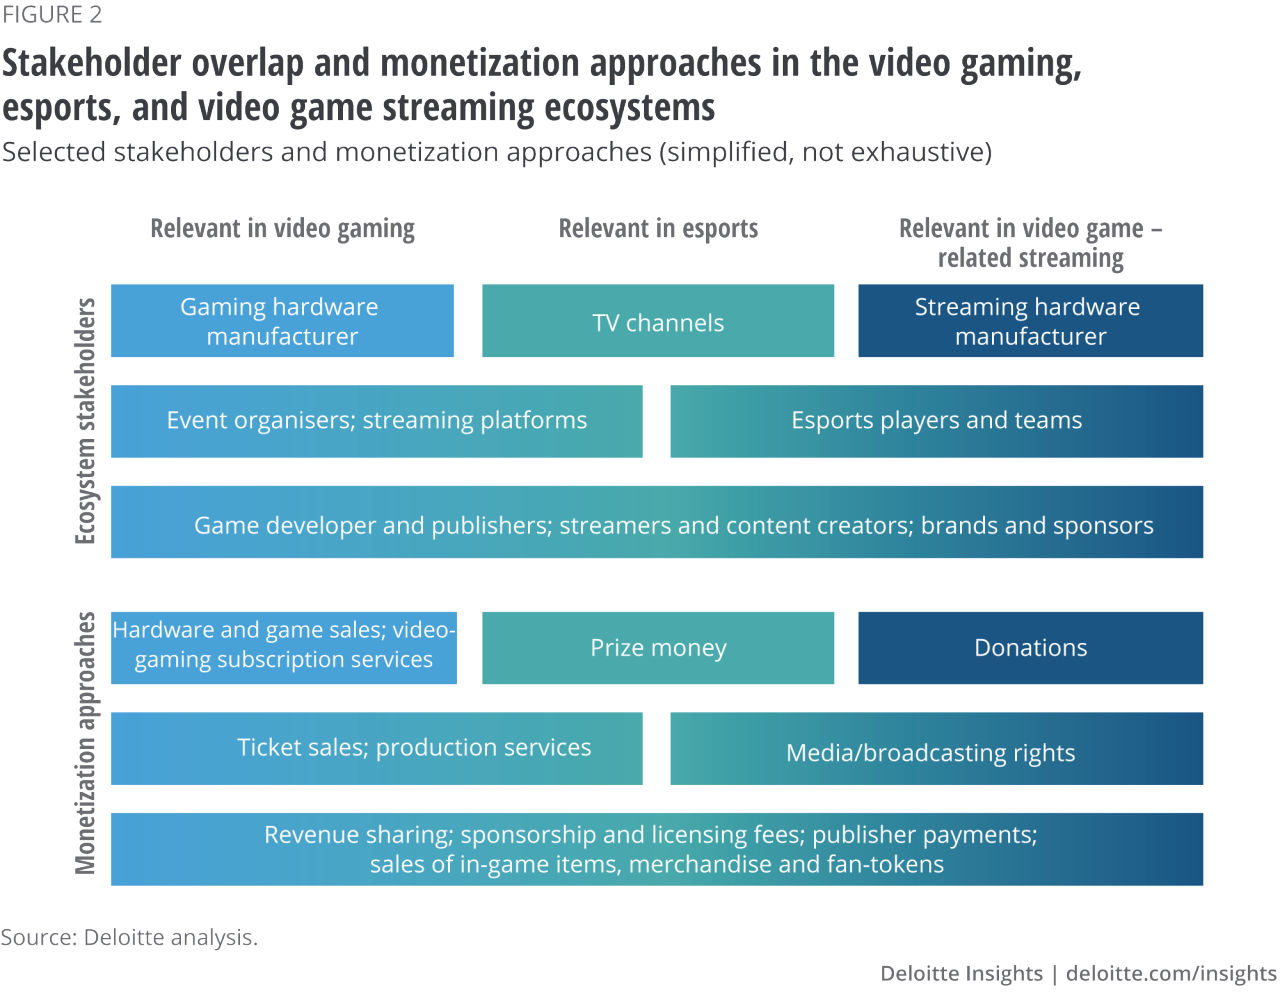 Figure 2. Stakeholder overlap and monetization approaches in the video gaming, esports and video game streaming ecosystems